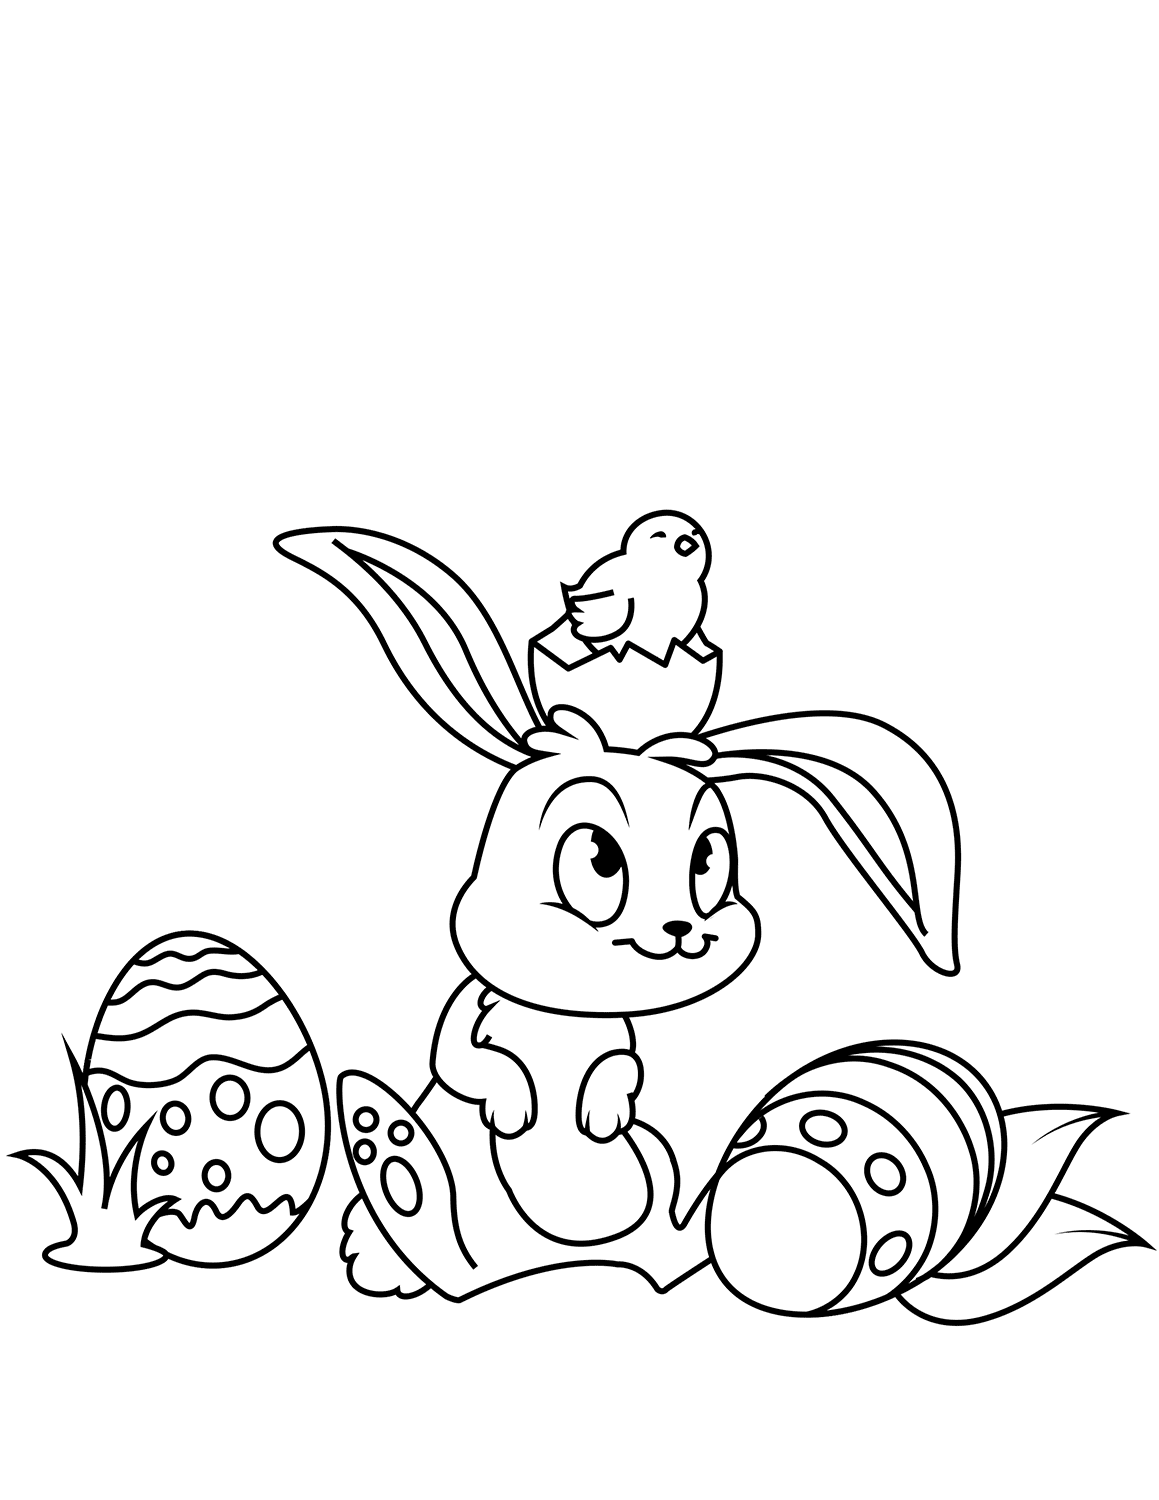 Cute Easter Bunny And Chick Coloring Page